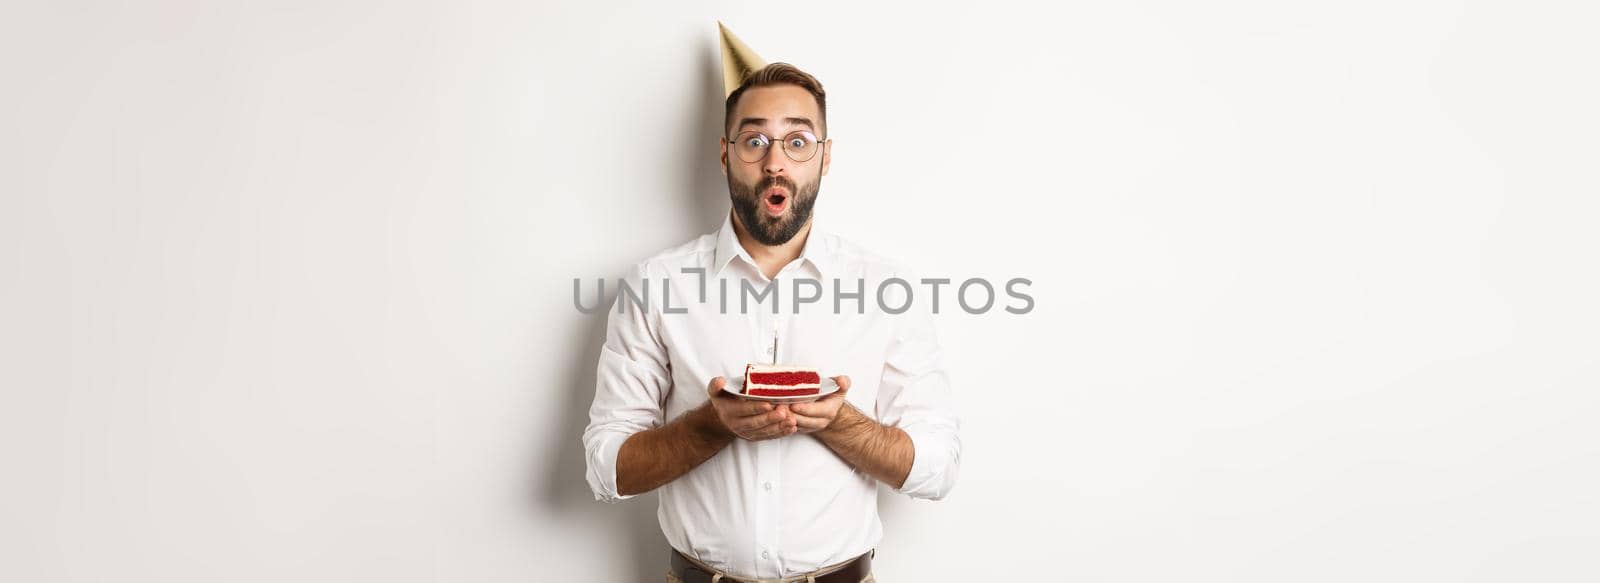 Holidays and celebration. Happy man having birthday party, making wish on b-day cake and smiling, standing against white background.